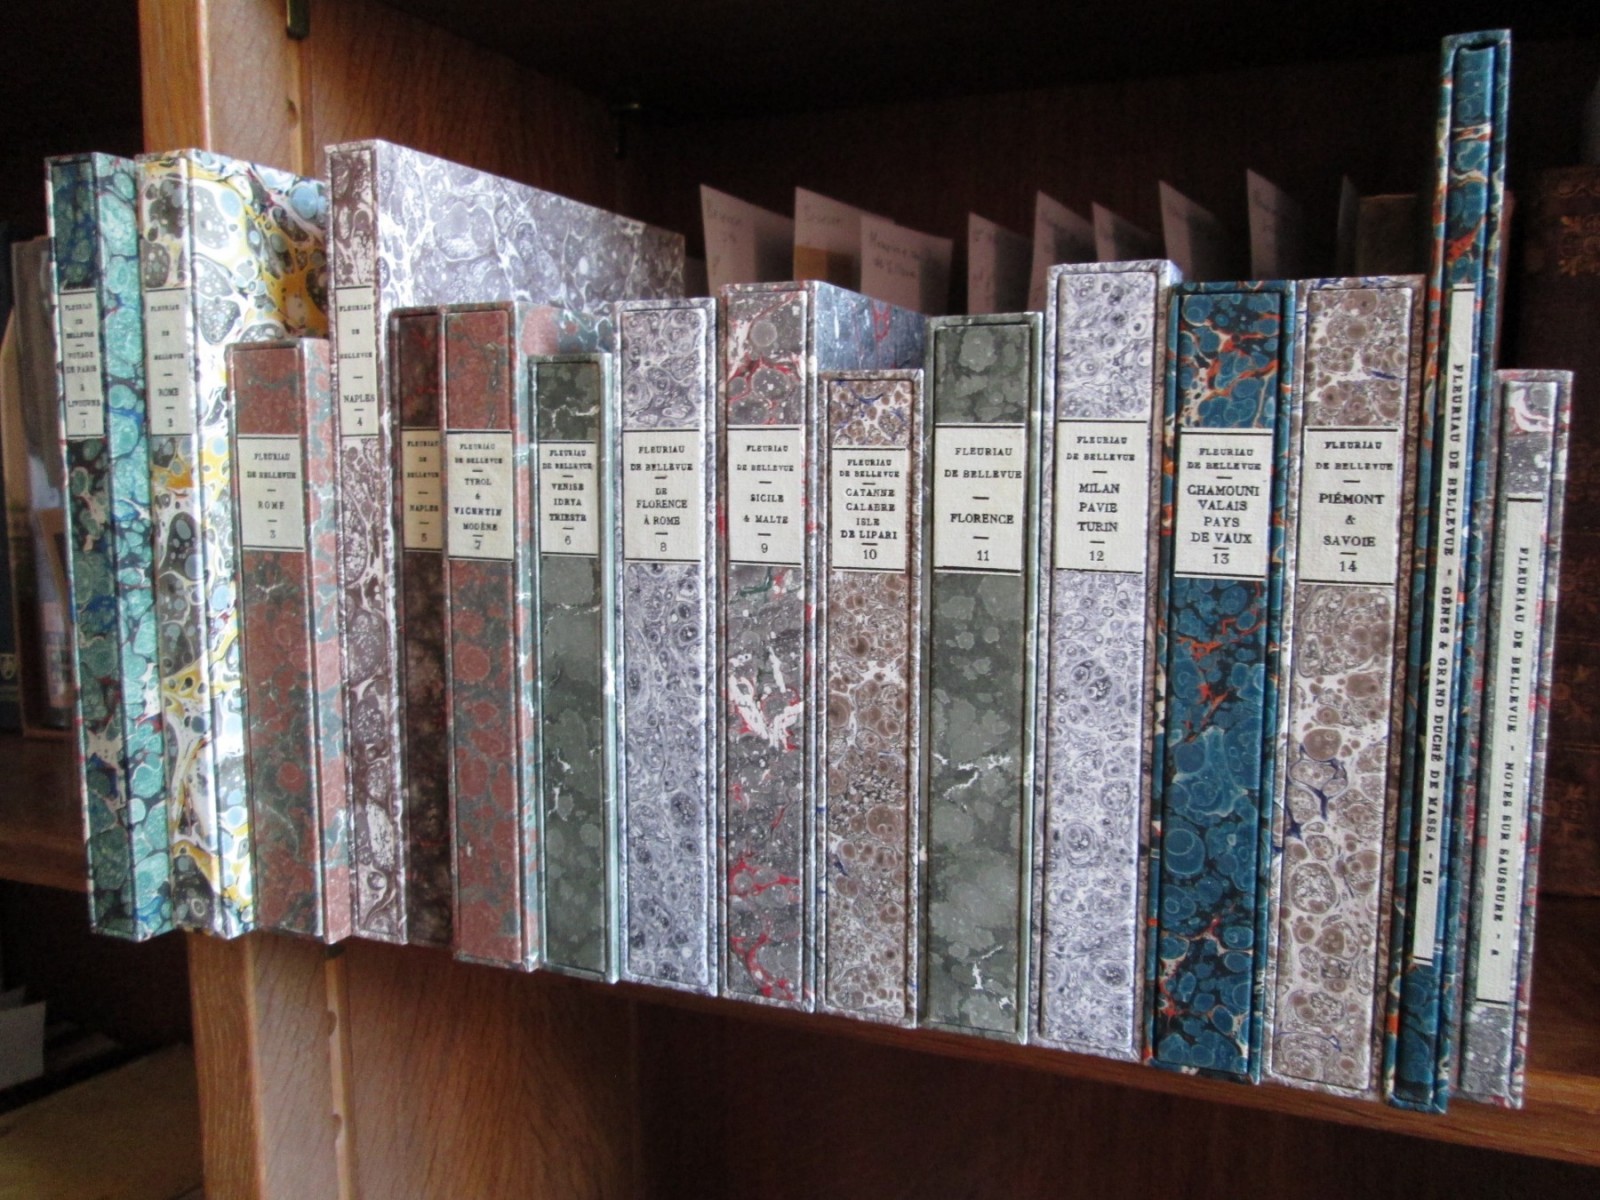 The collection is elegantly housed in custom slipcases